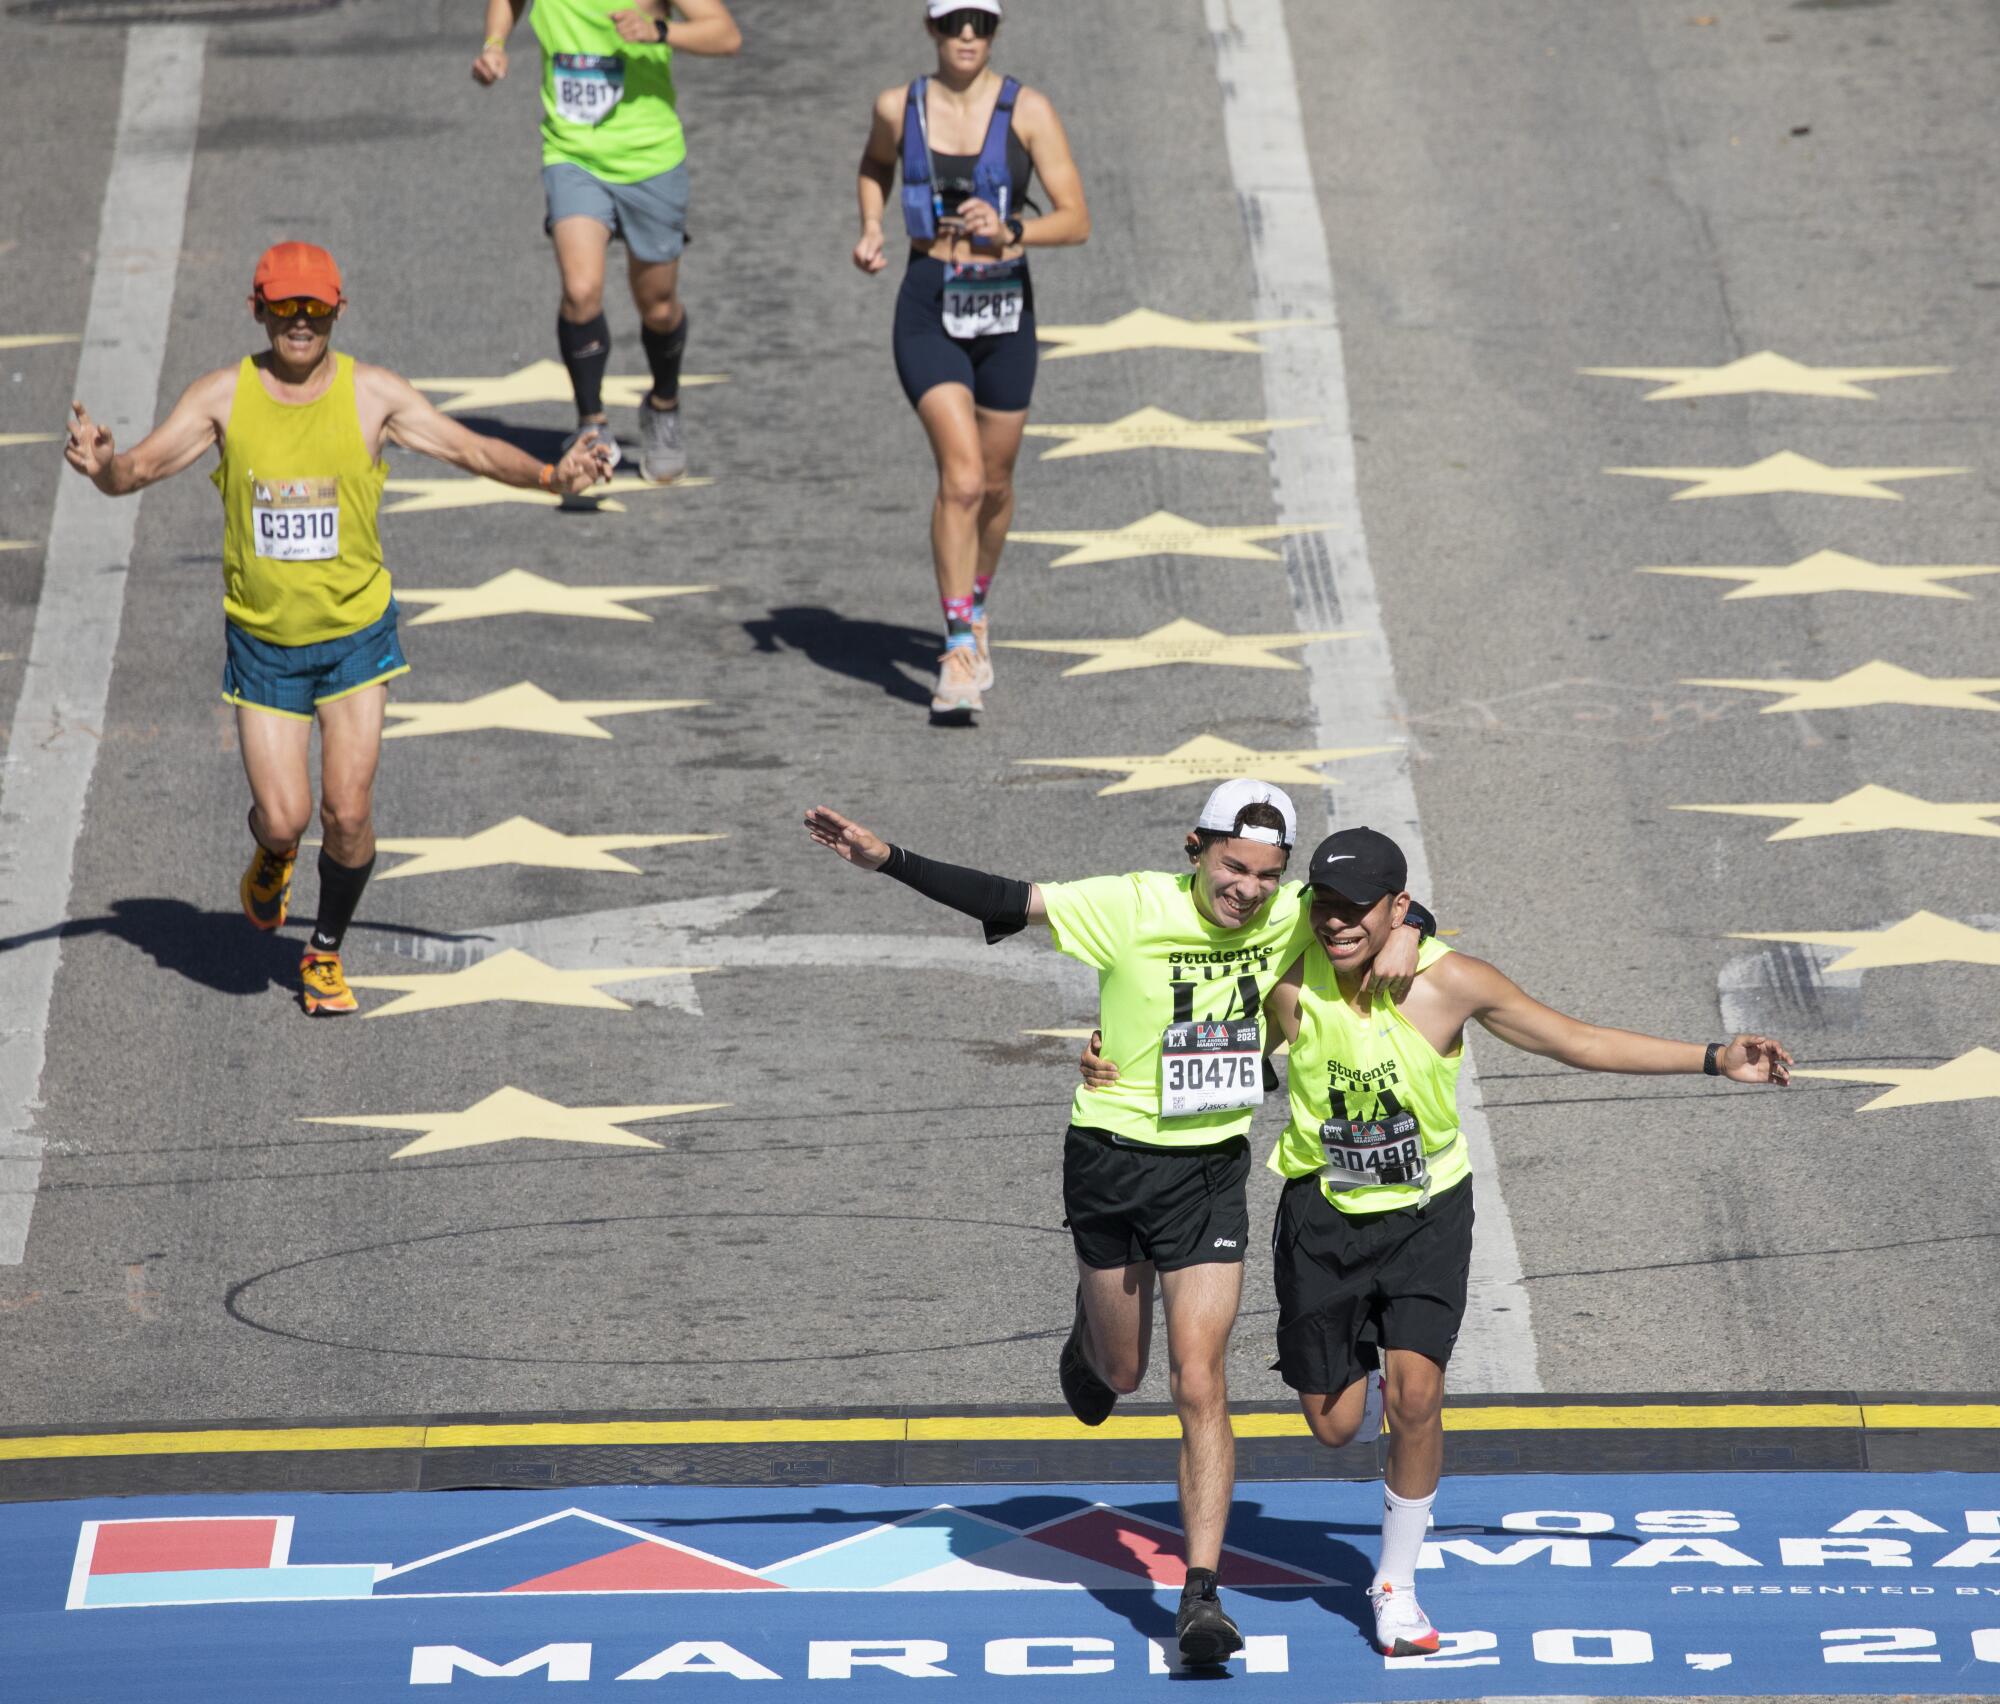 Runners cross the finish line on Avenue of the Stars